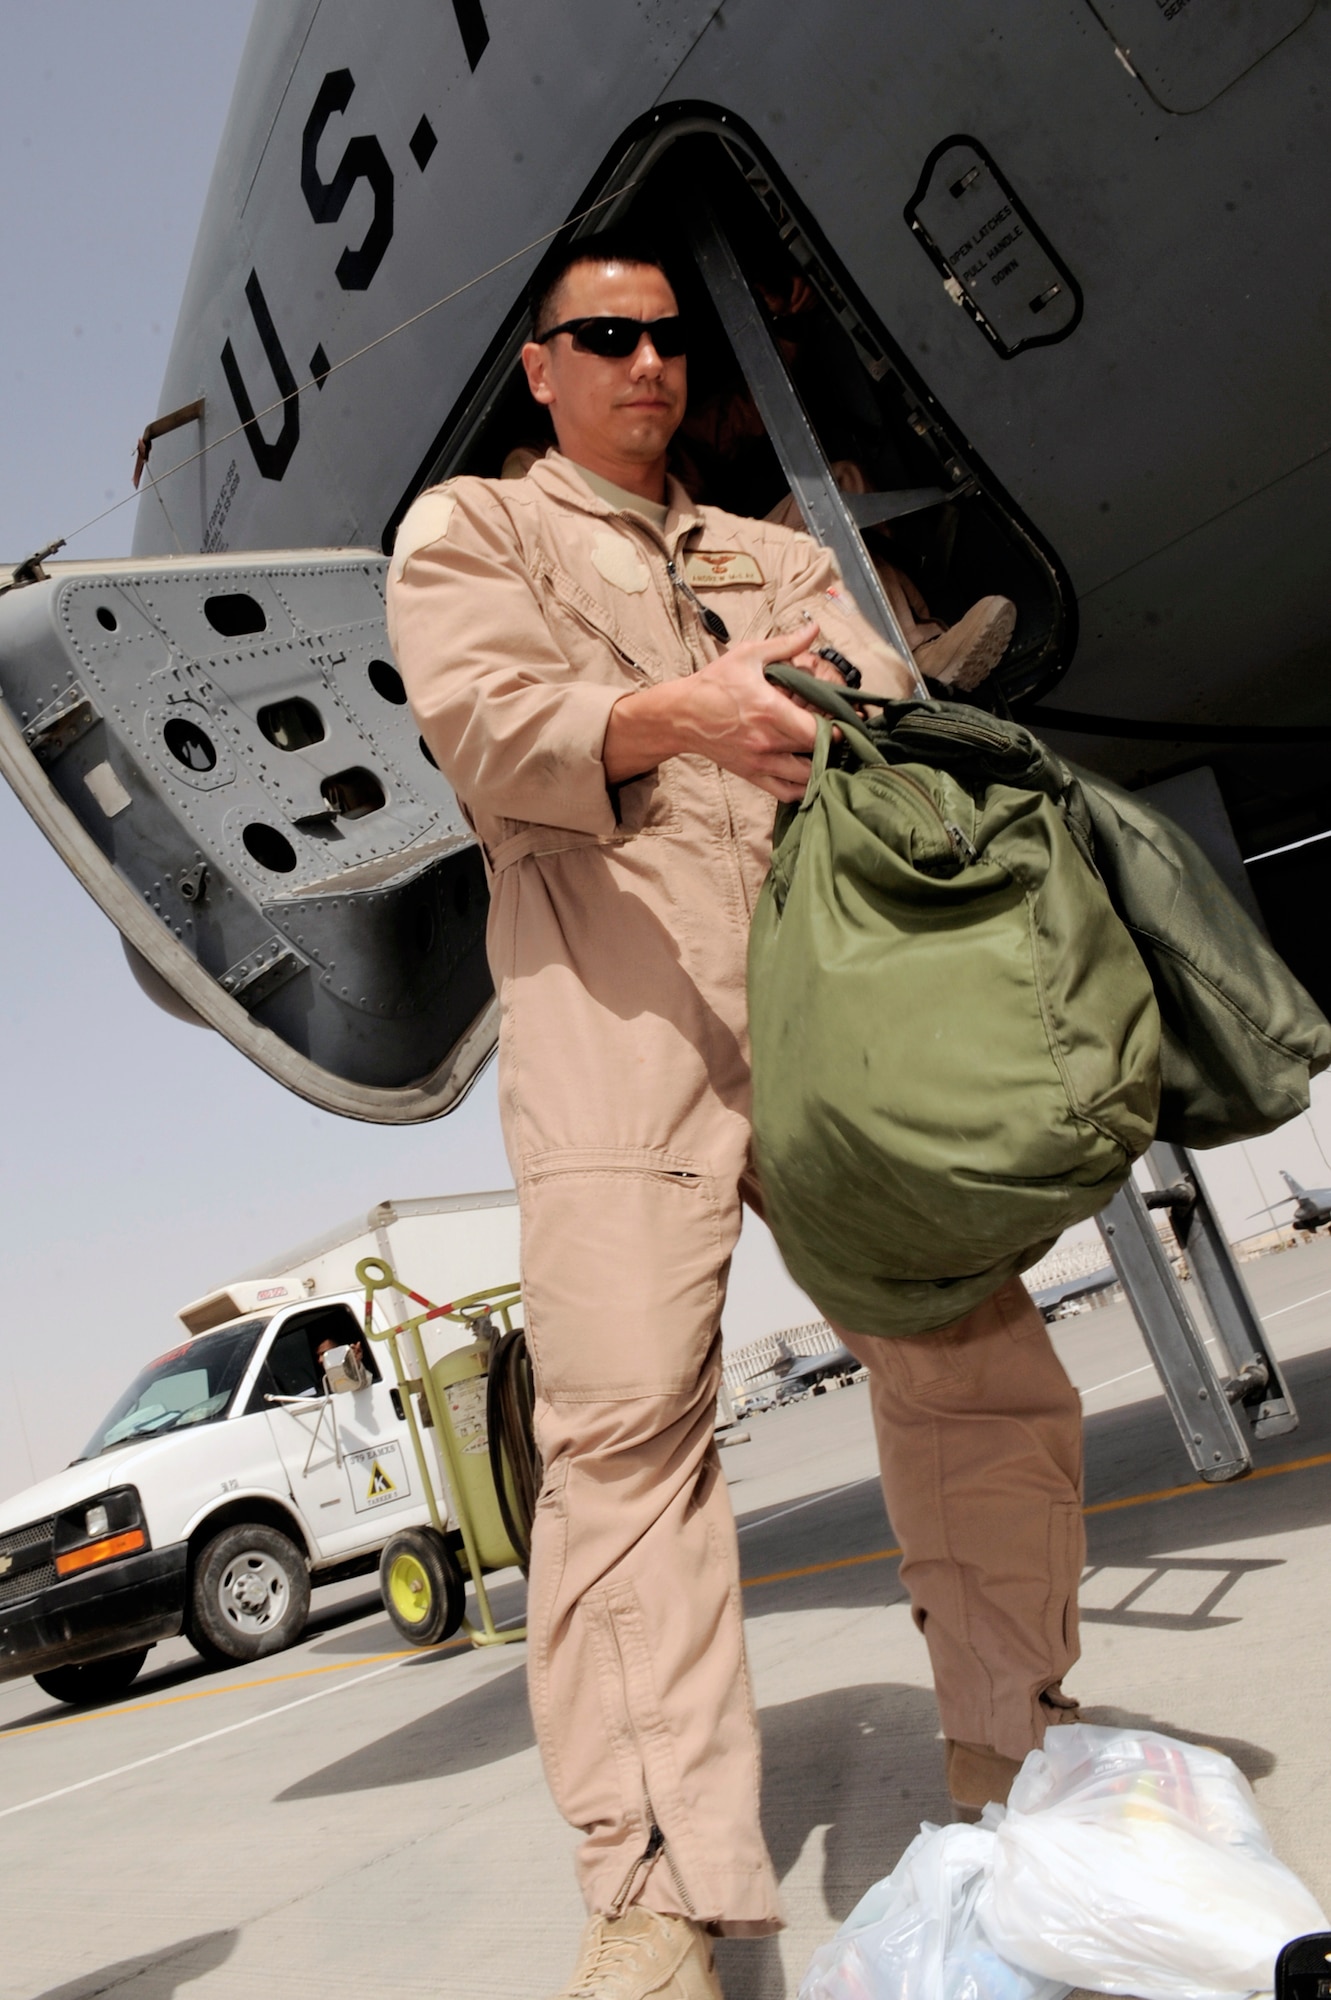 Capt. Andrew McLay, a pilot with the 340th Expeditionary Air Refueling Squadron at an air base in Southwest Asia, prepares to load his gear into a KC-135 Stratotanker before a refueling mission.  (U.S. Air Force photo/Staff Sgt. Joshua Garcia) 